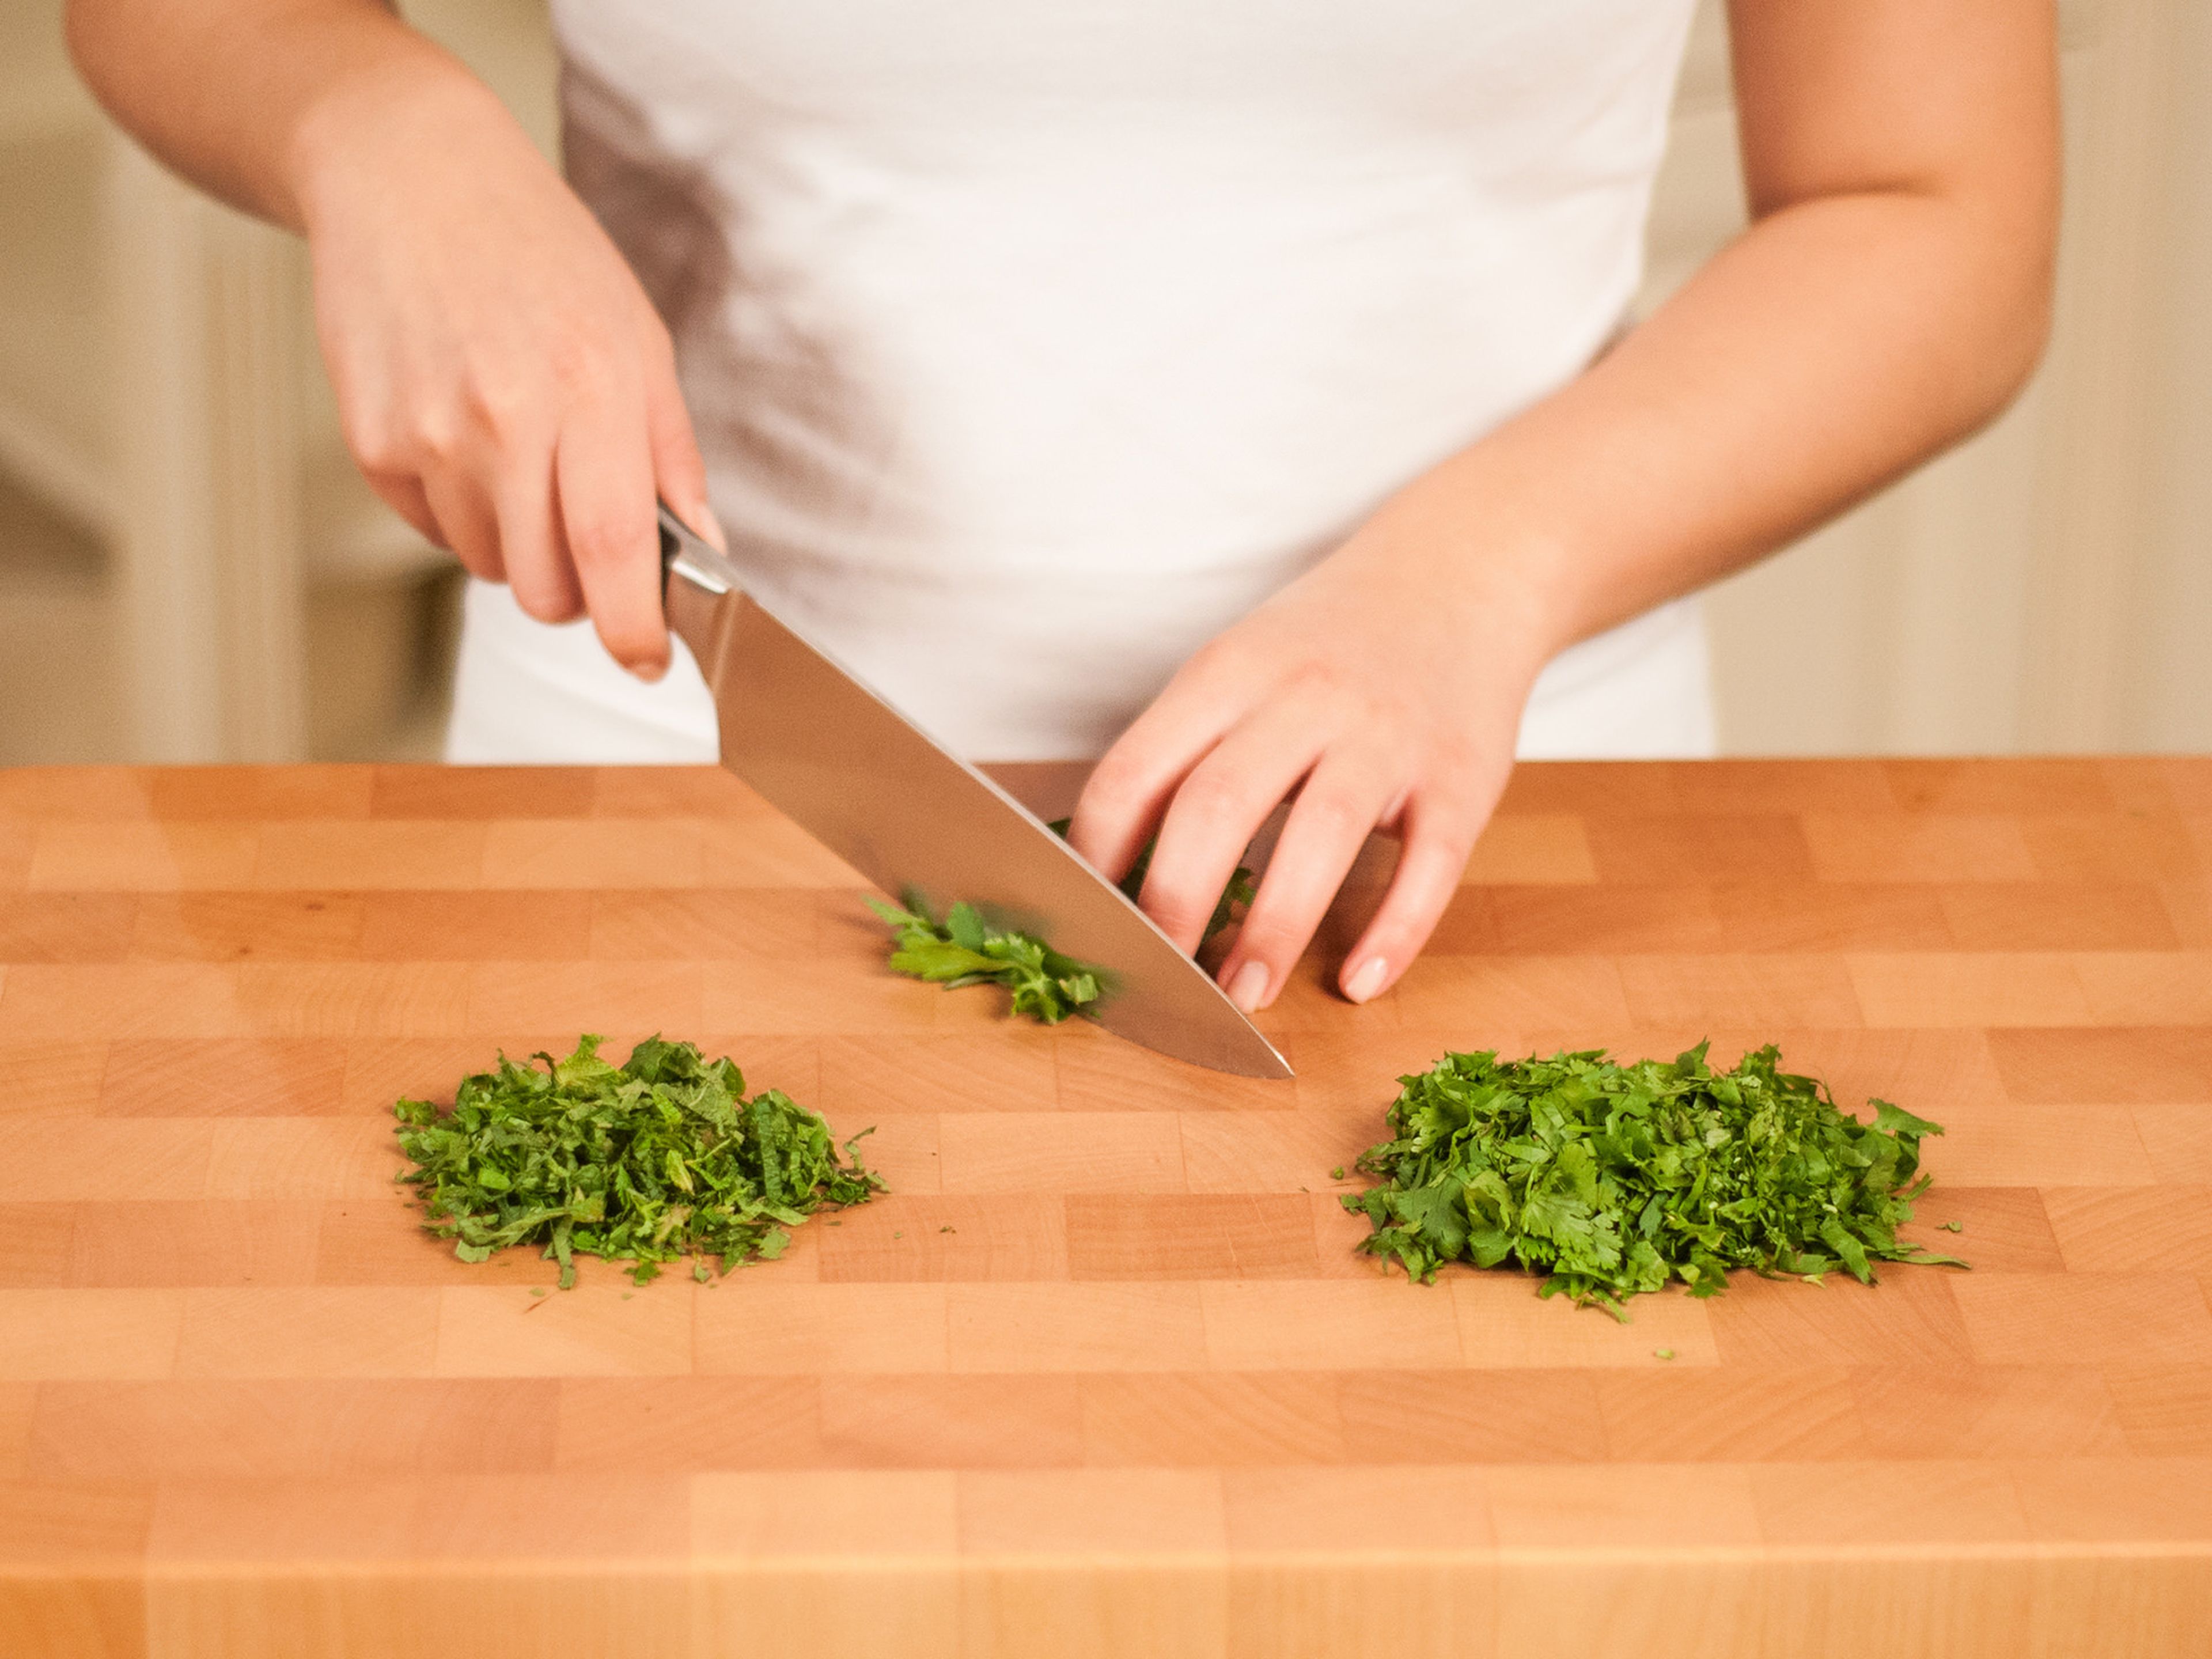 In the meantime, pick coriander, mint, and parsley leaves. Finely slice them.